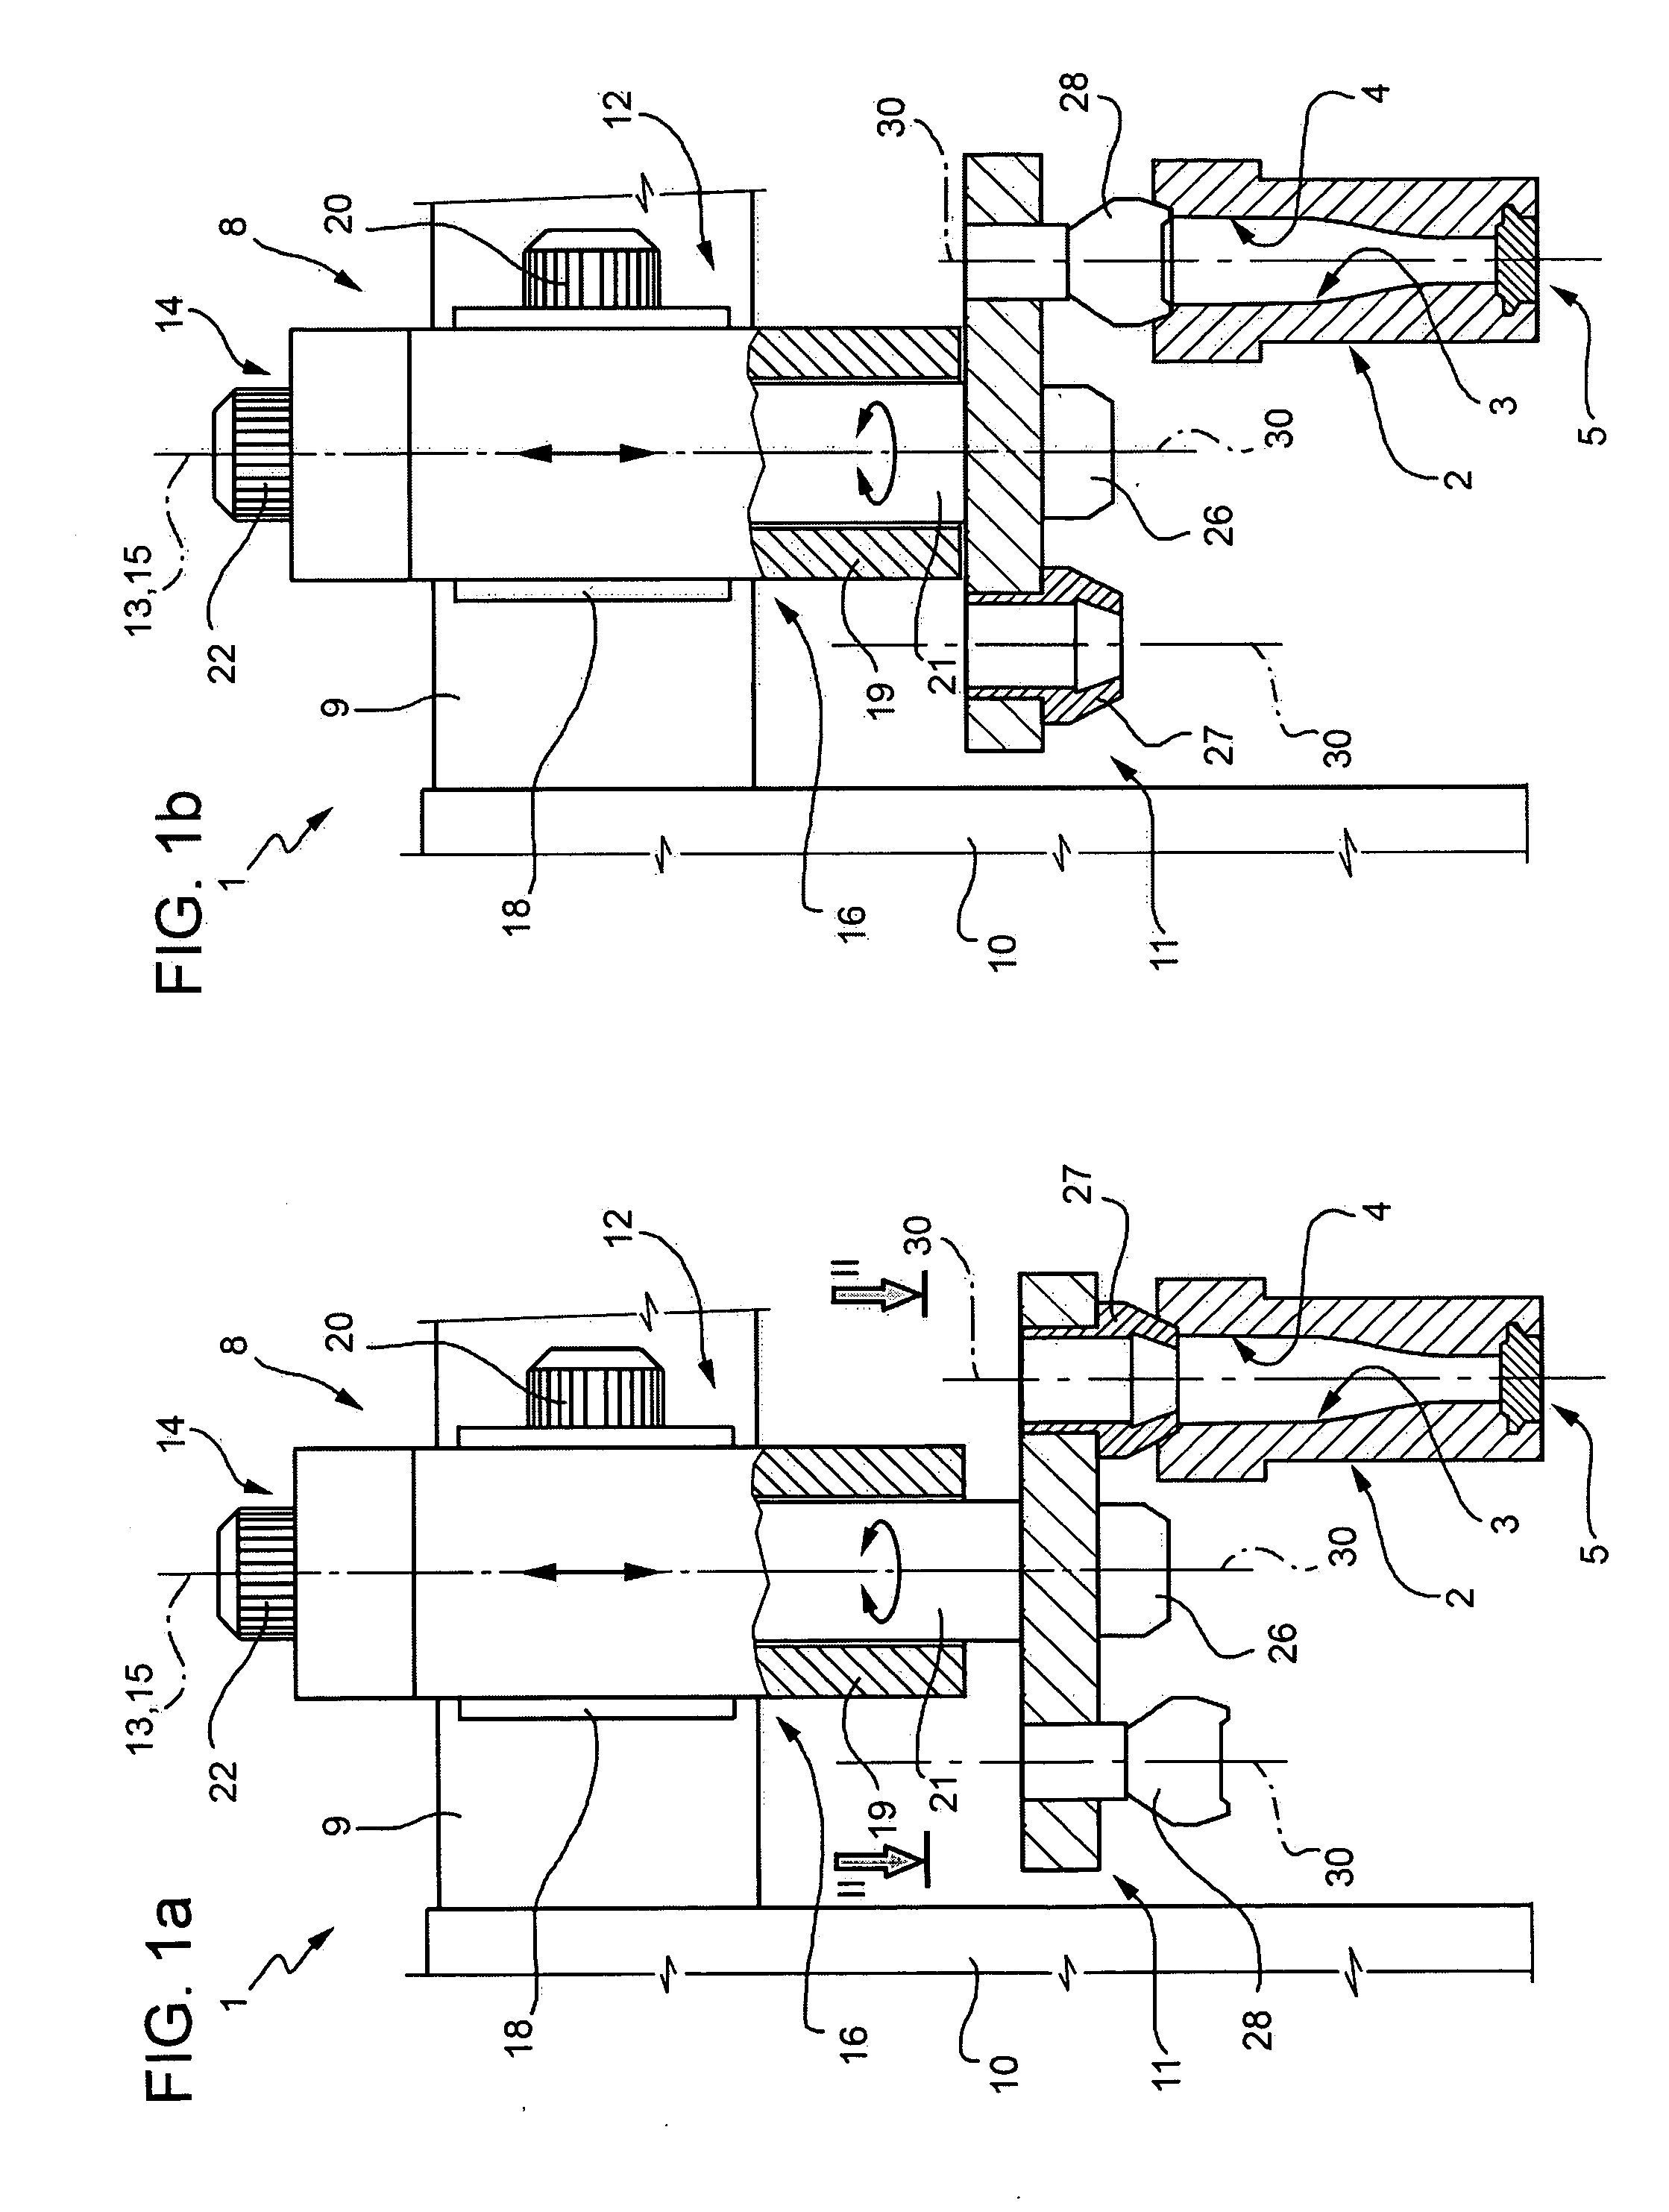 Multifunctional group for a glass items forming machine